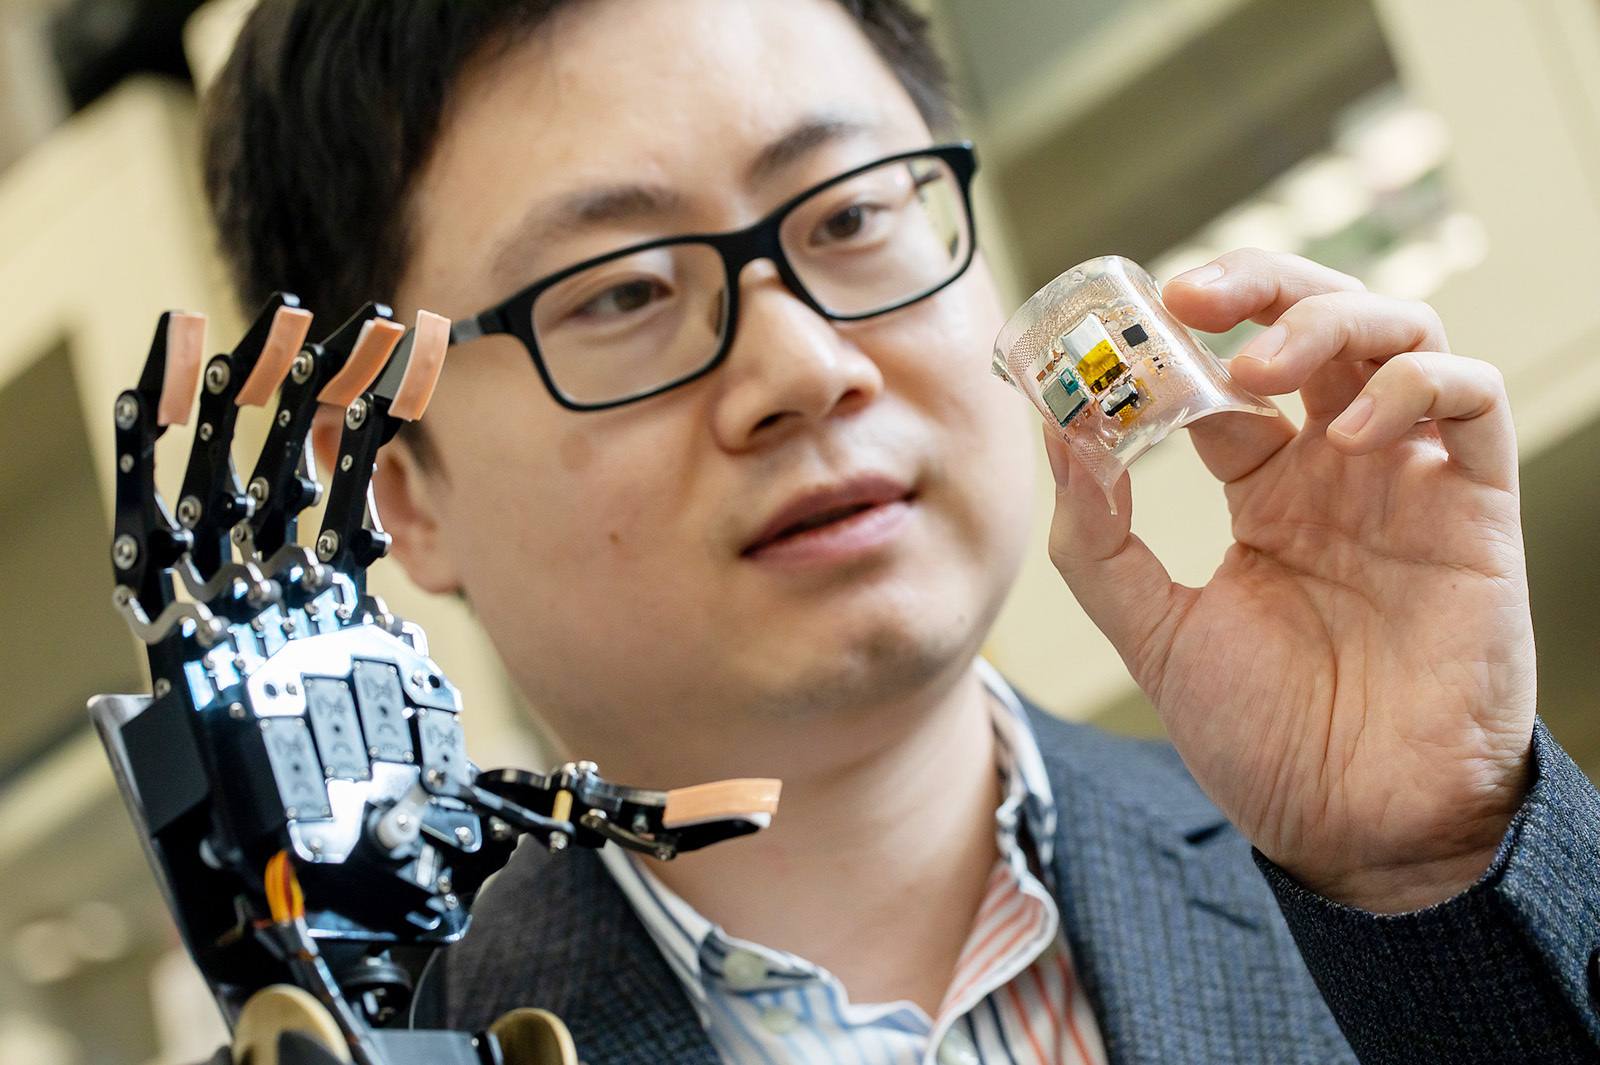 The flexible, multi-layered electronic skin developed by Dr Yu Xinge and his team is the cornerstone of the new Robotic VR system. The sensors on the robotic hands provide haptic feedback to the user.